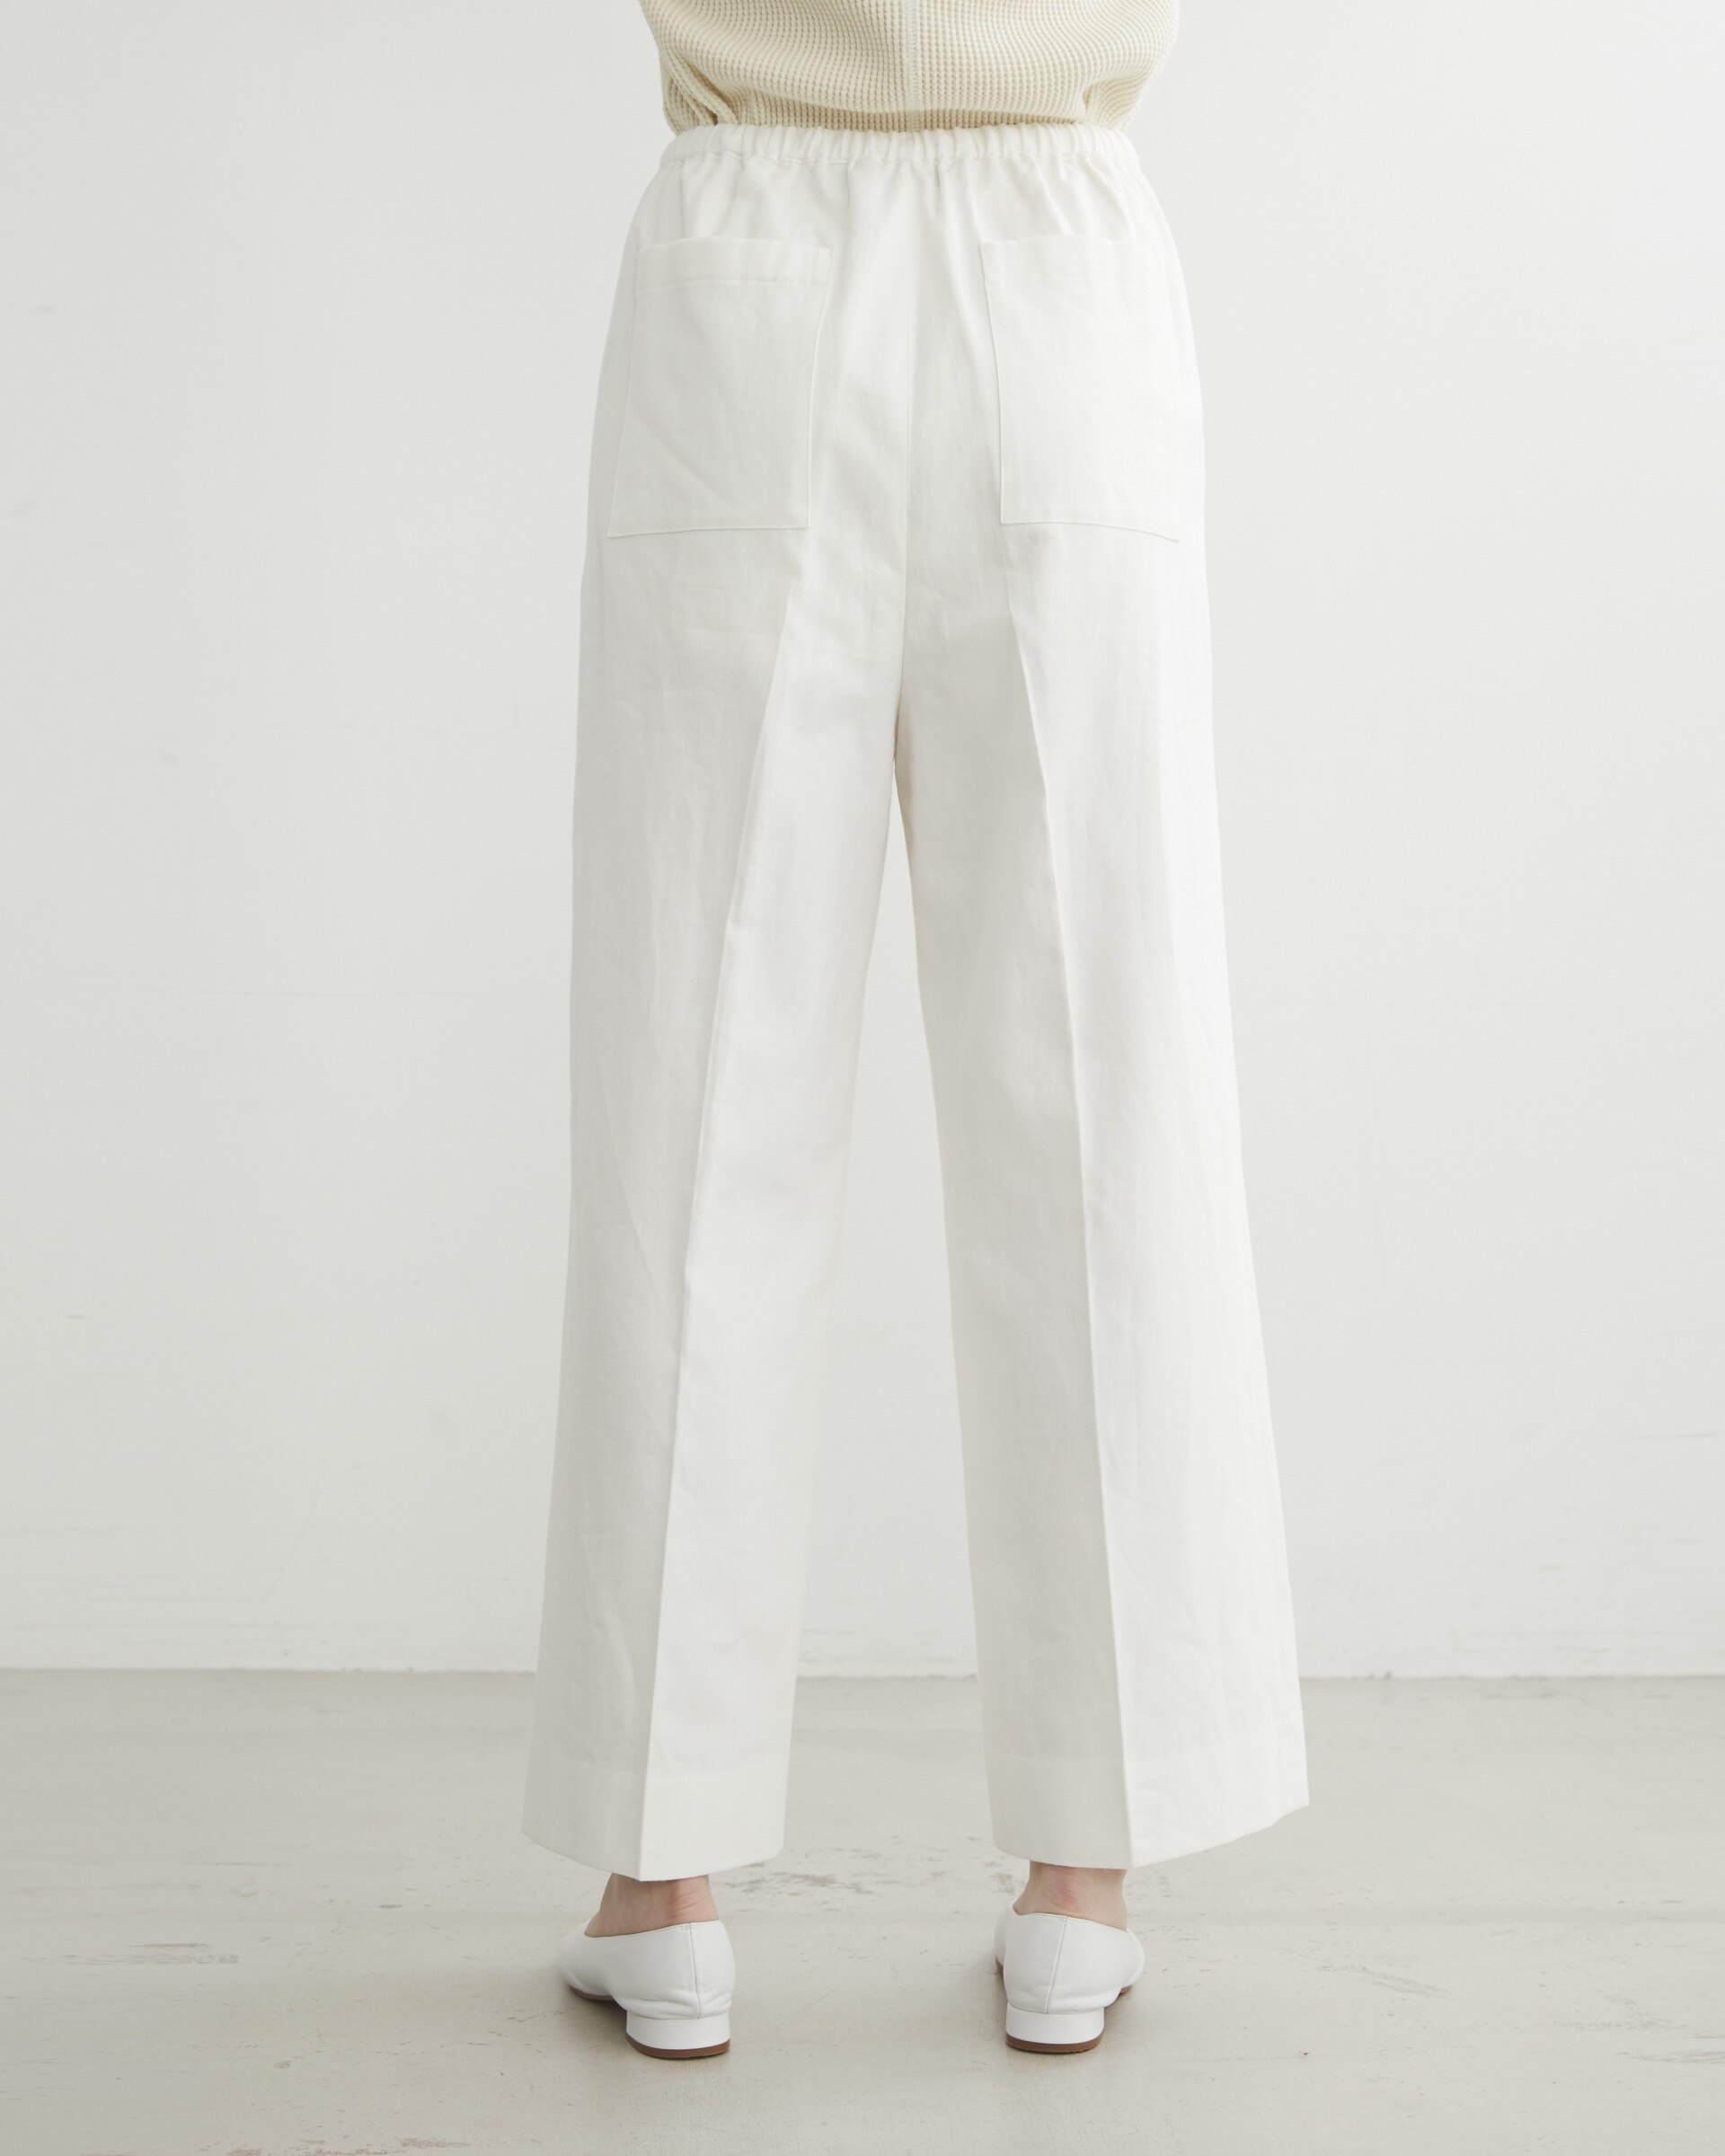 HIGH STREET COLLECTION】WAIST SHIRRING PANTS|Traditional